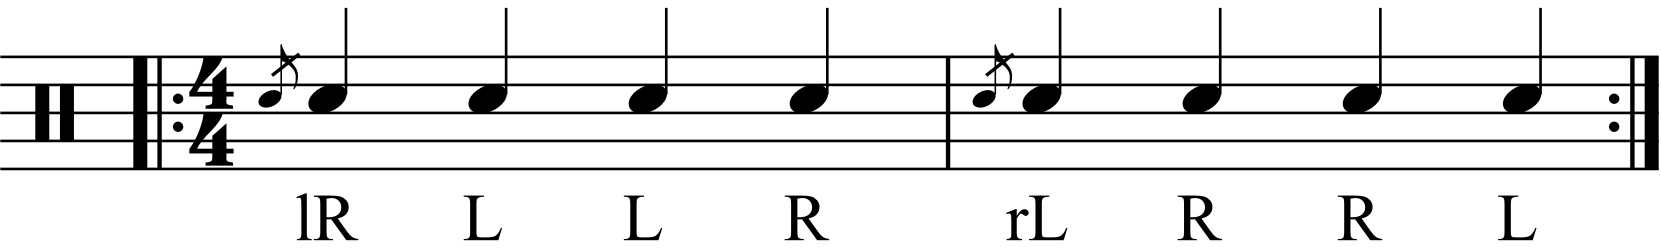 The Inverted Flamadiddle as quarter notes